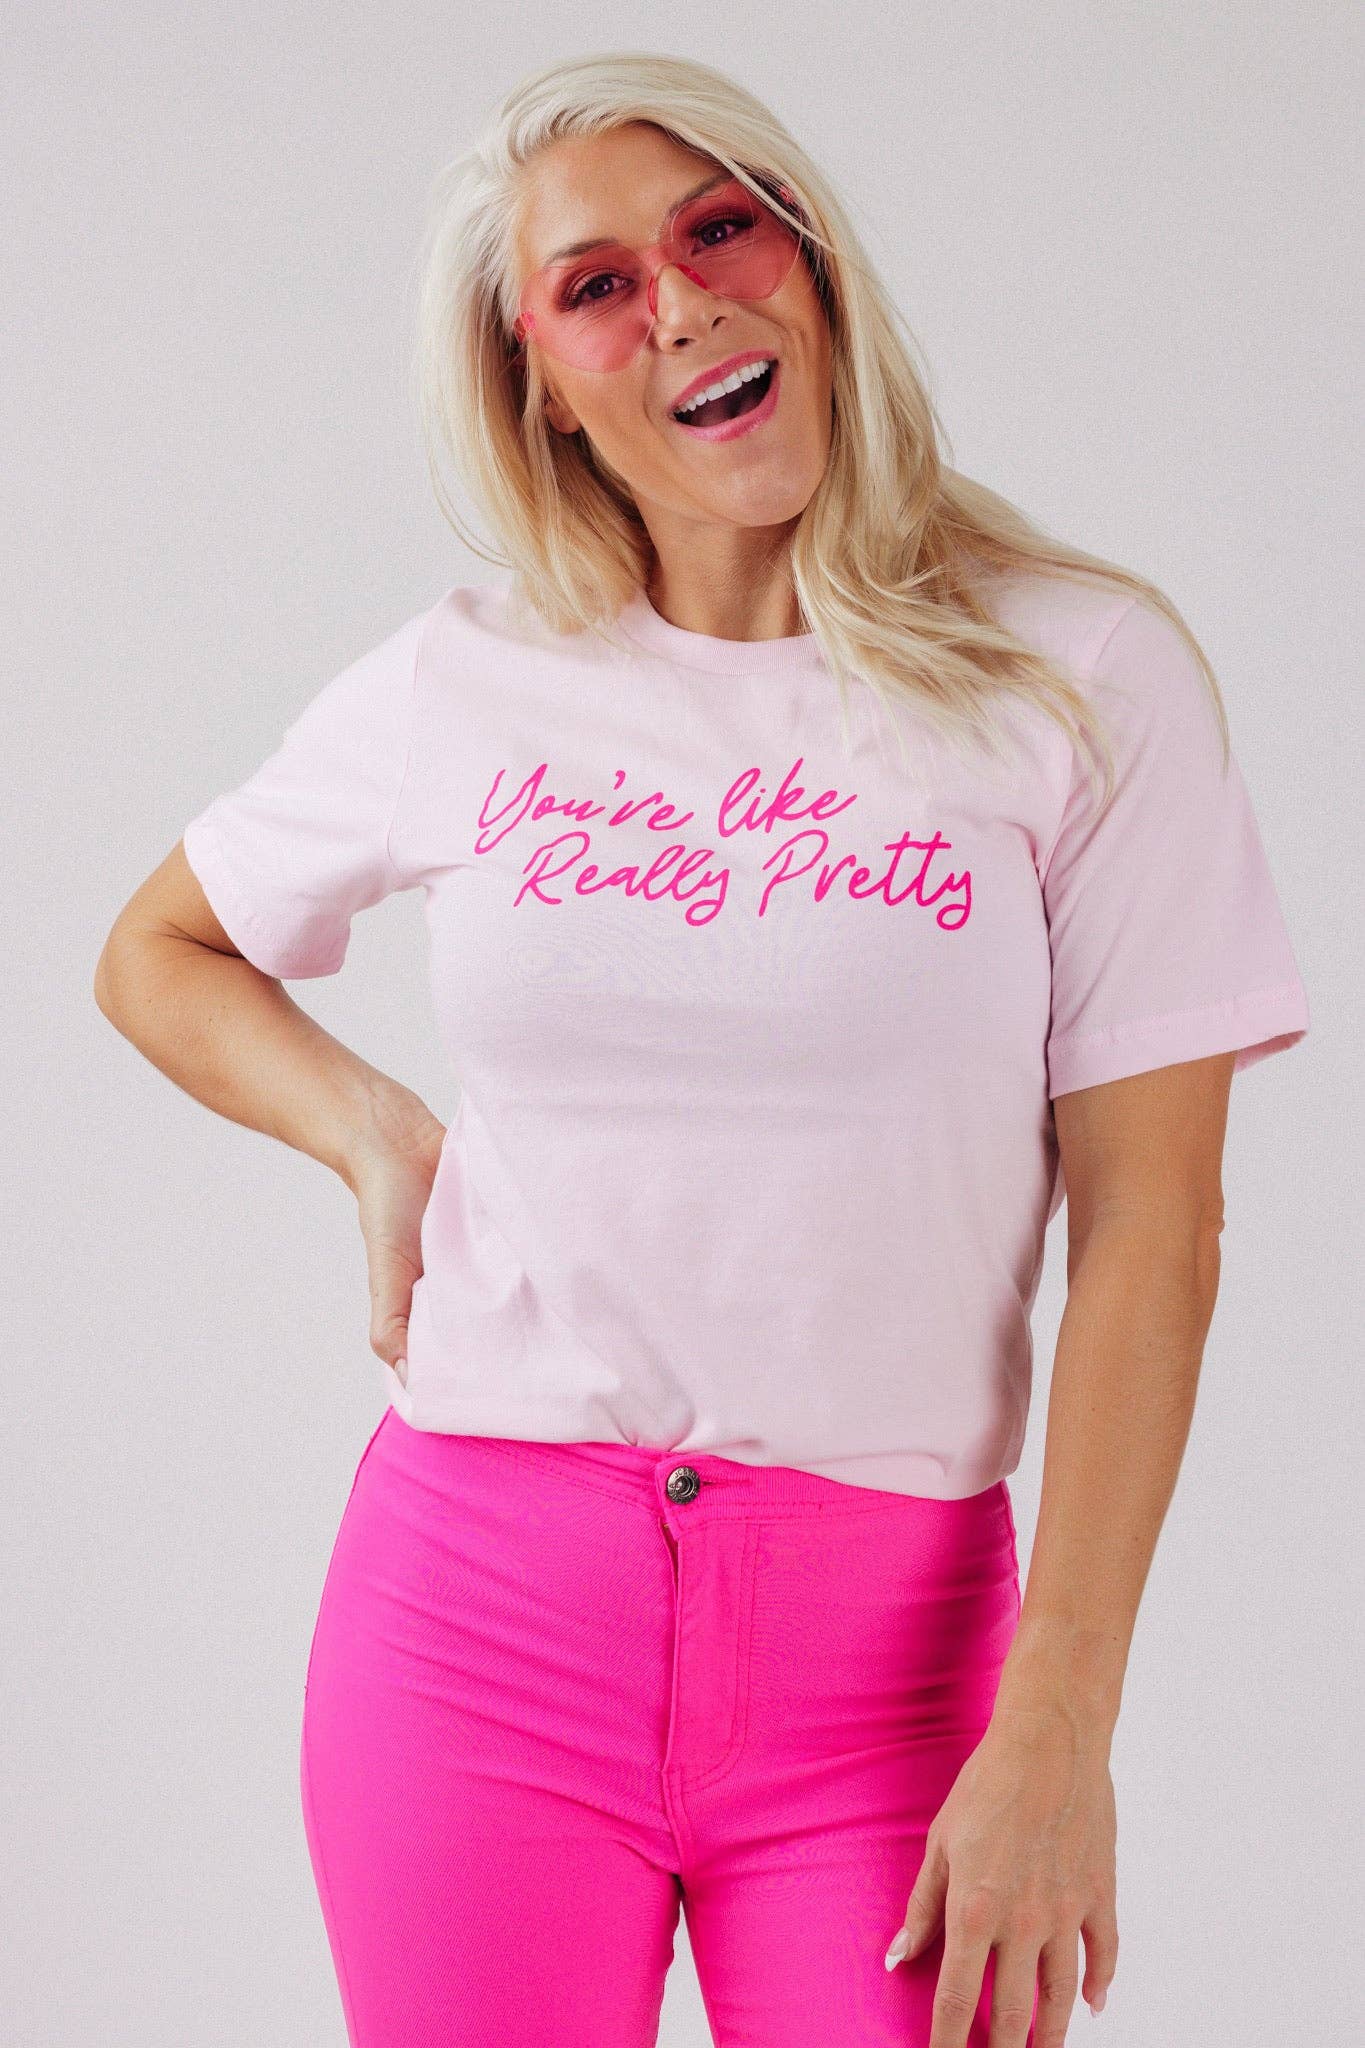 Really Pretty Pink Graphic Tee